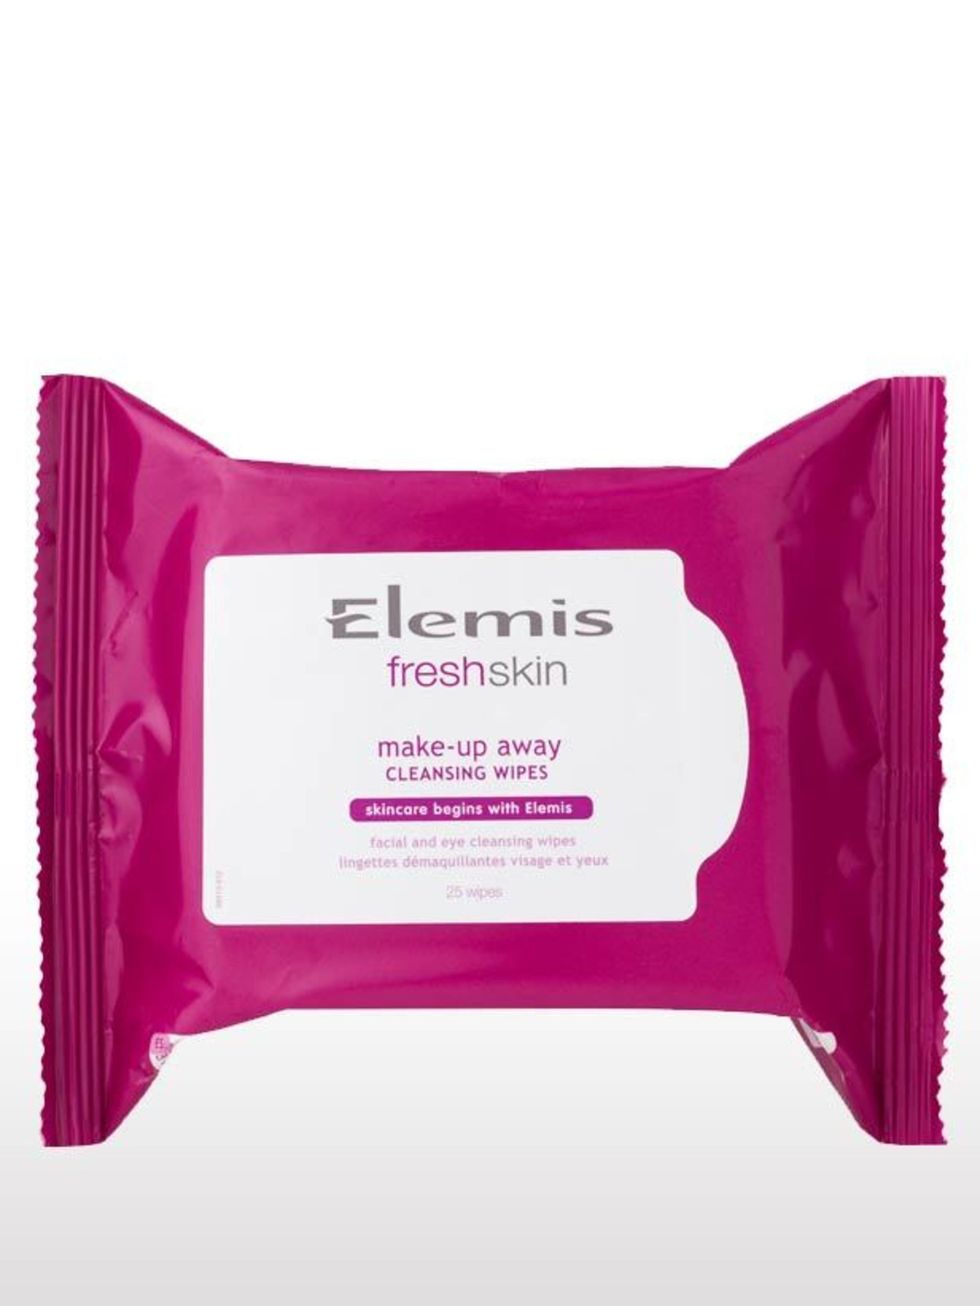 <p><strong>What is it?</strong> Fresh Skin is the younger sister line to the long established and well loved Elemis brand. Elemis prides itself on a balance of natural ingredients powered by science and cutting-edge technology. The products really work, w